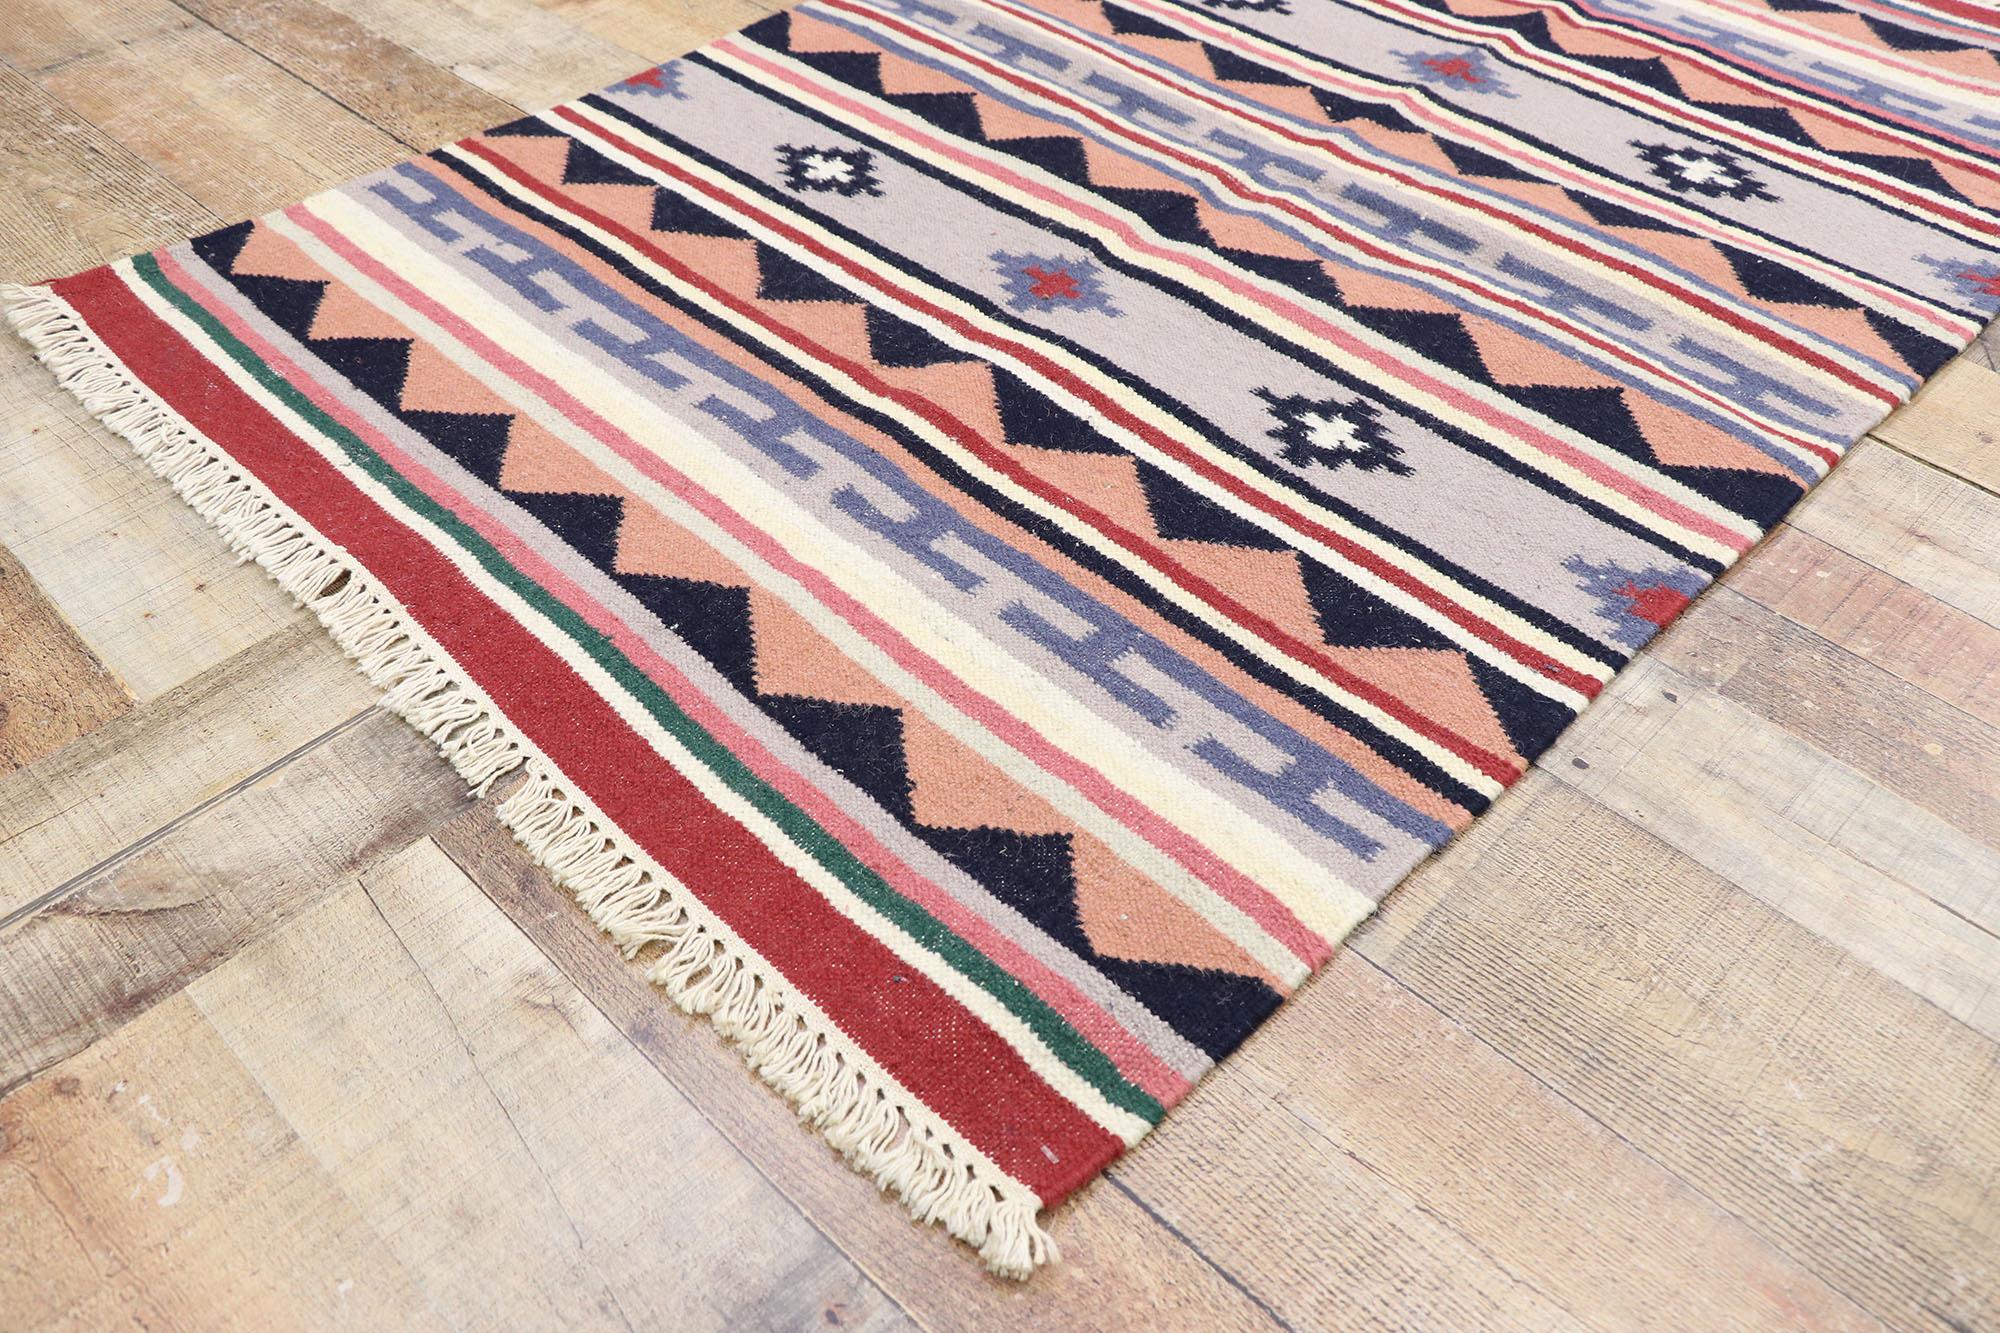 Wool Vintage Persian Shiraz Kilim Rug with Boho Chic Tribal Style For Sale